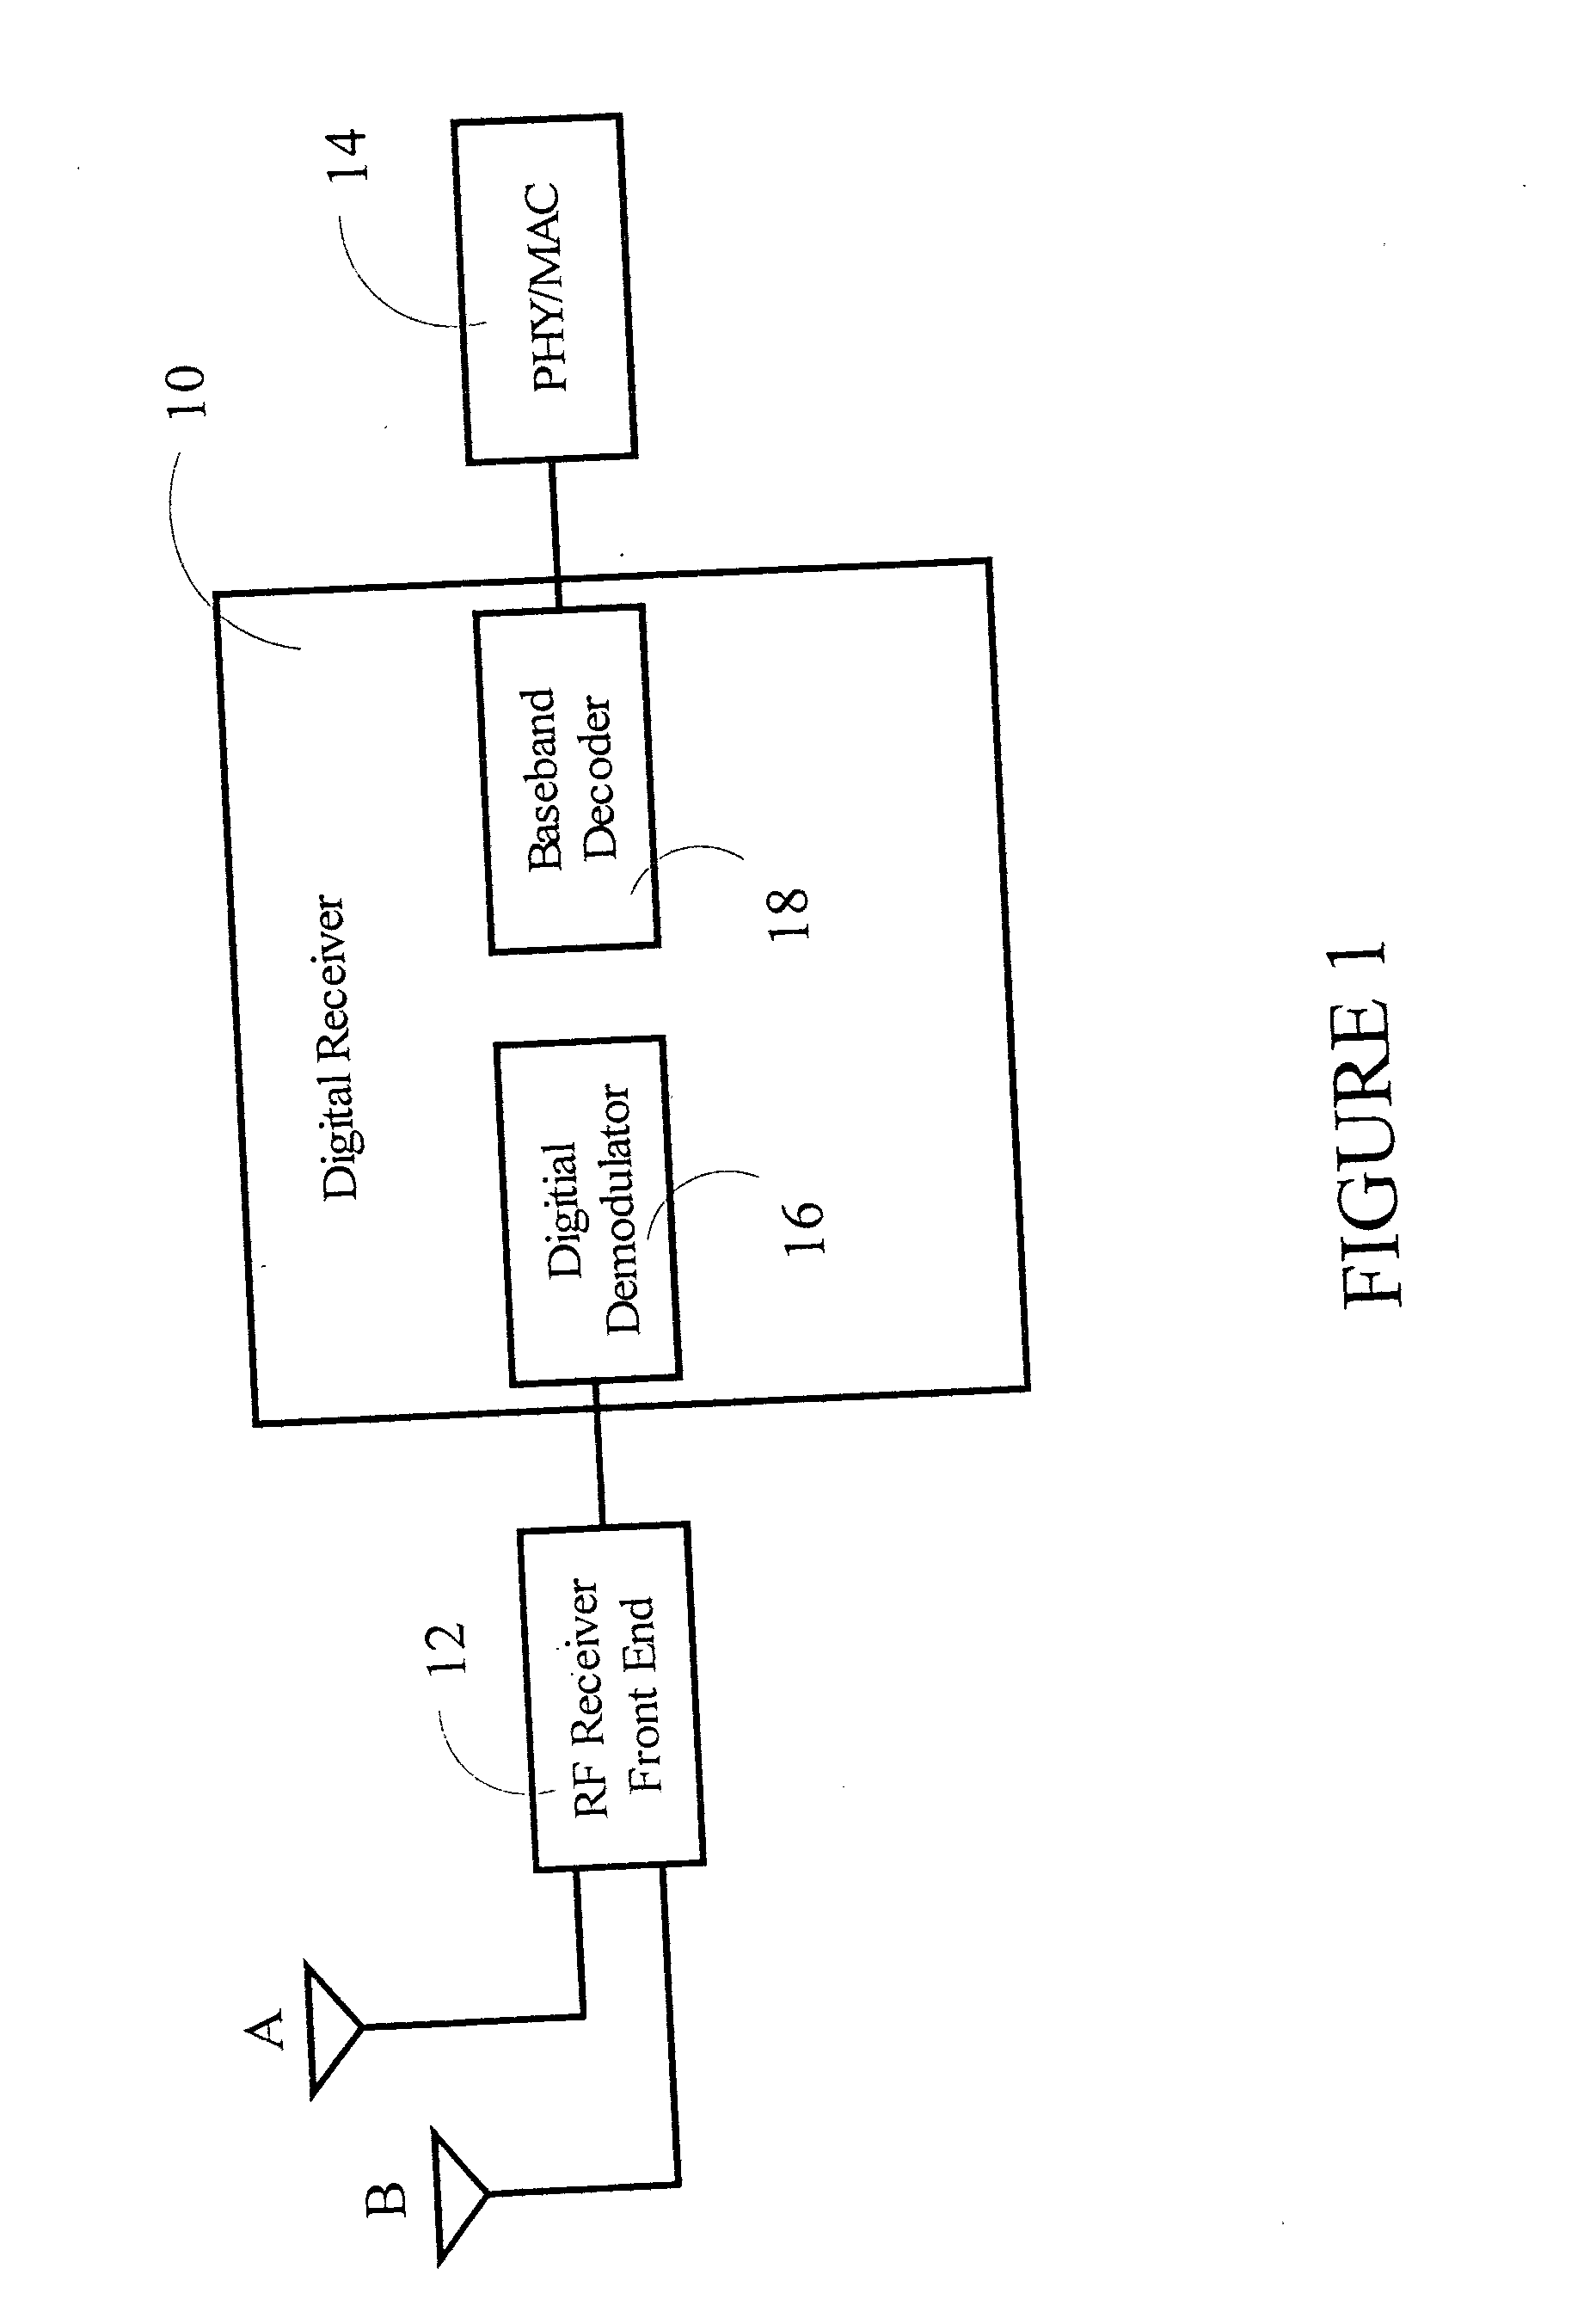 Method for amplitude insensitive packet detection